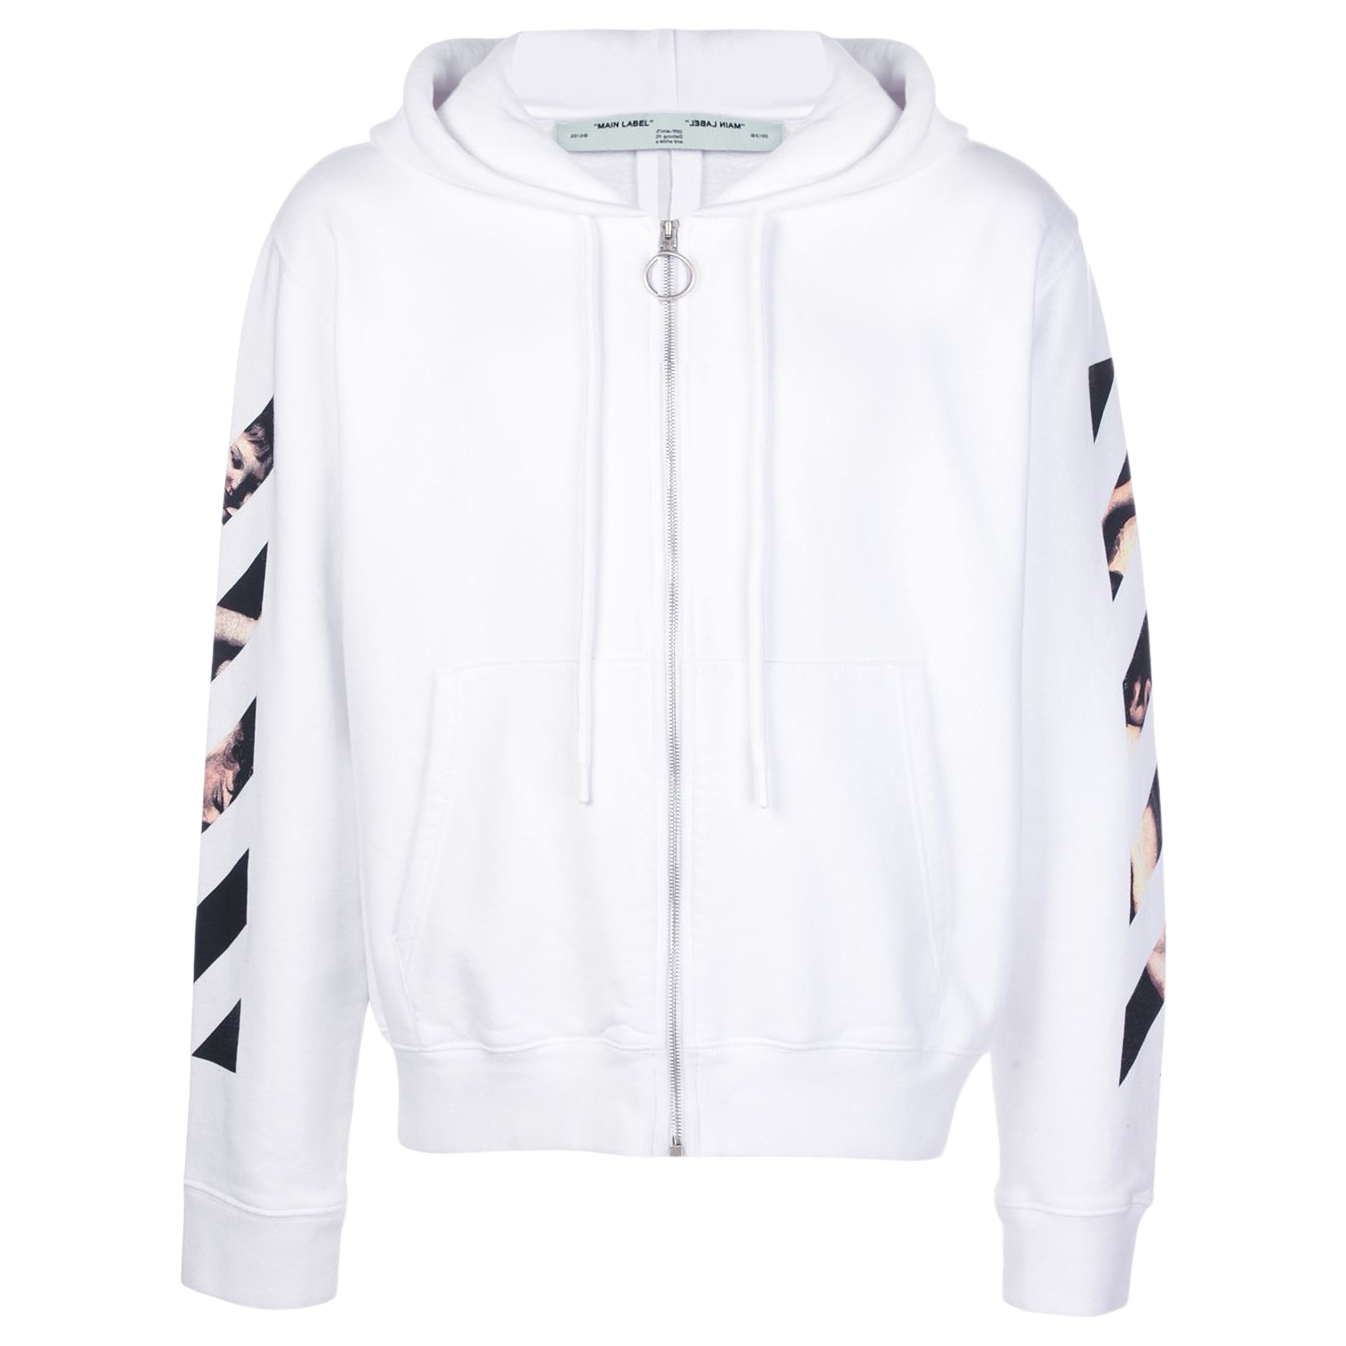 OFF-WHITE Caravaggio Arrows Zip Up Hoodie White Men's - SS20 - US